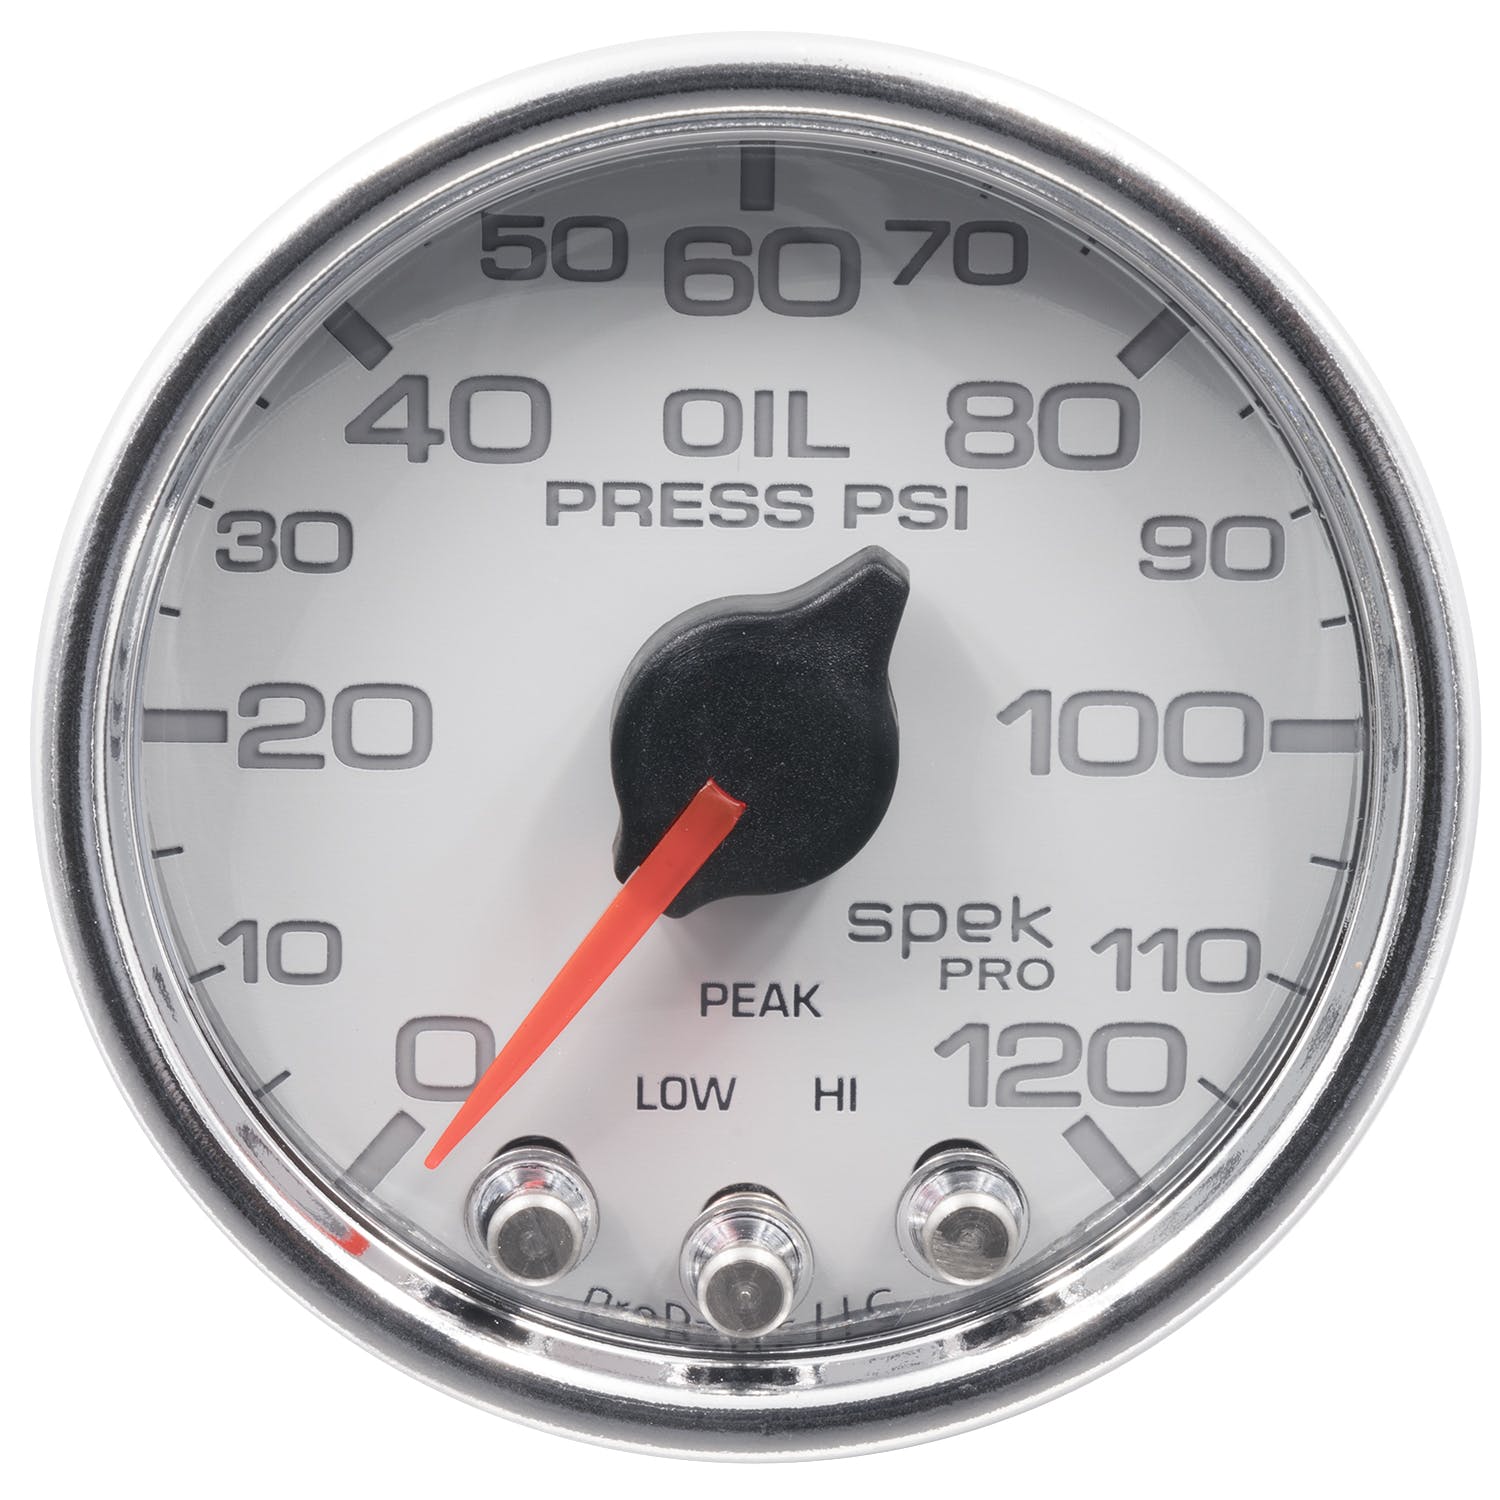 AutoMeter Products P32511 Oil Press Gauge, 2 1/16, 120psi, Stepper Motor w/Peak and Warn, White/Chrome